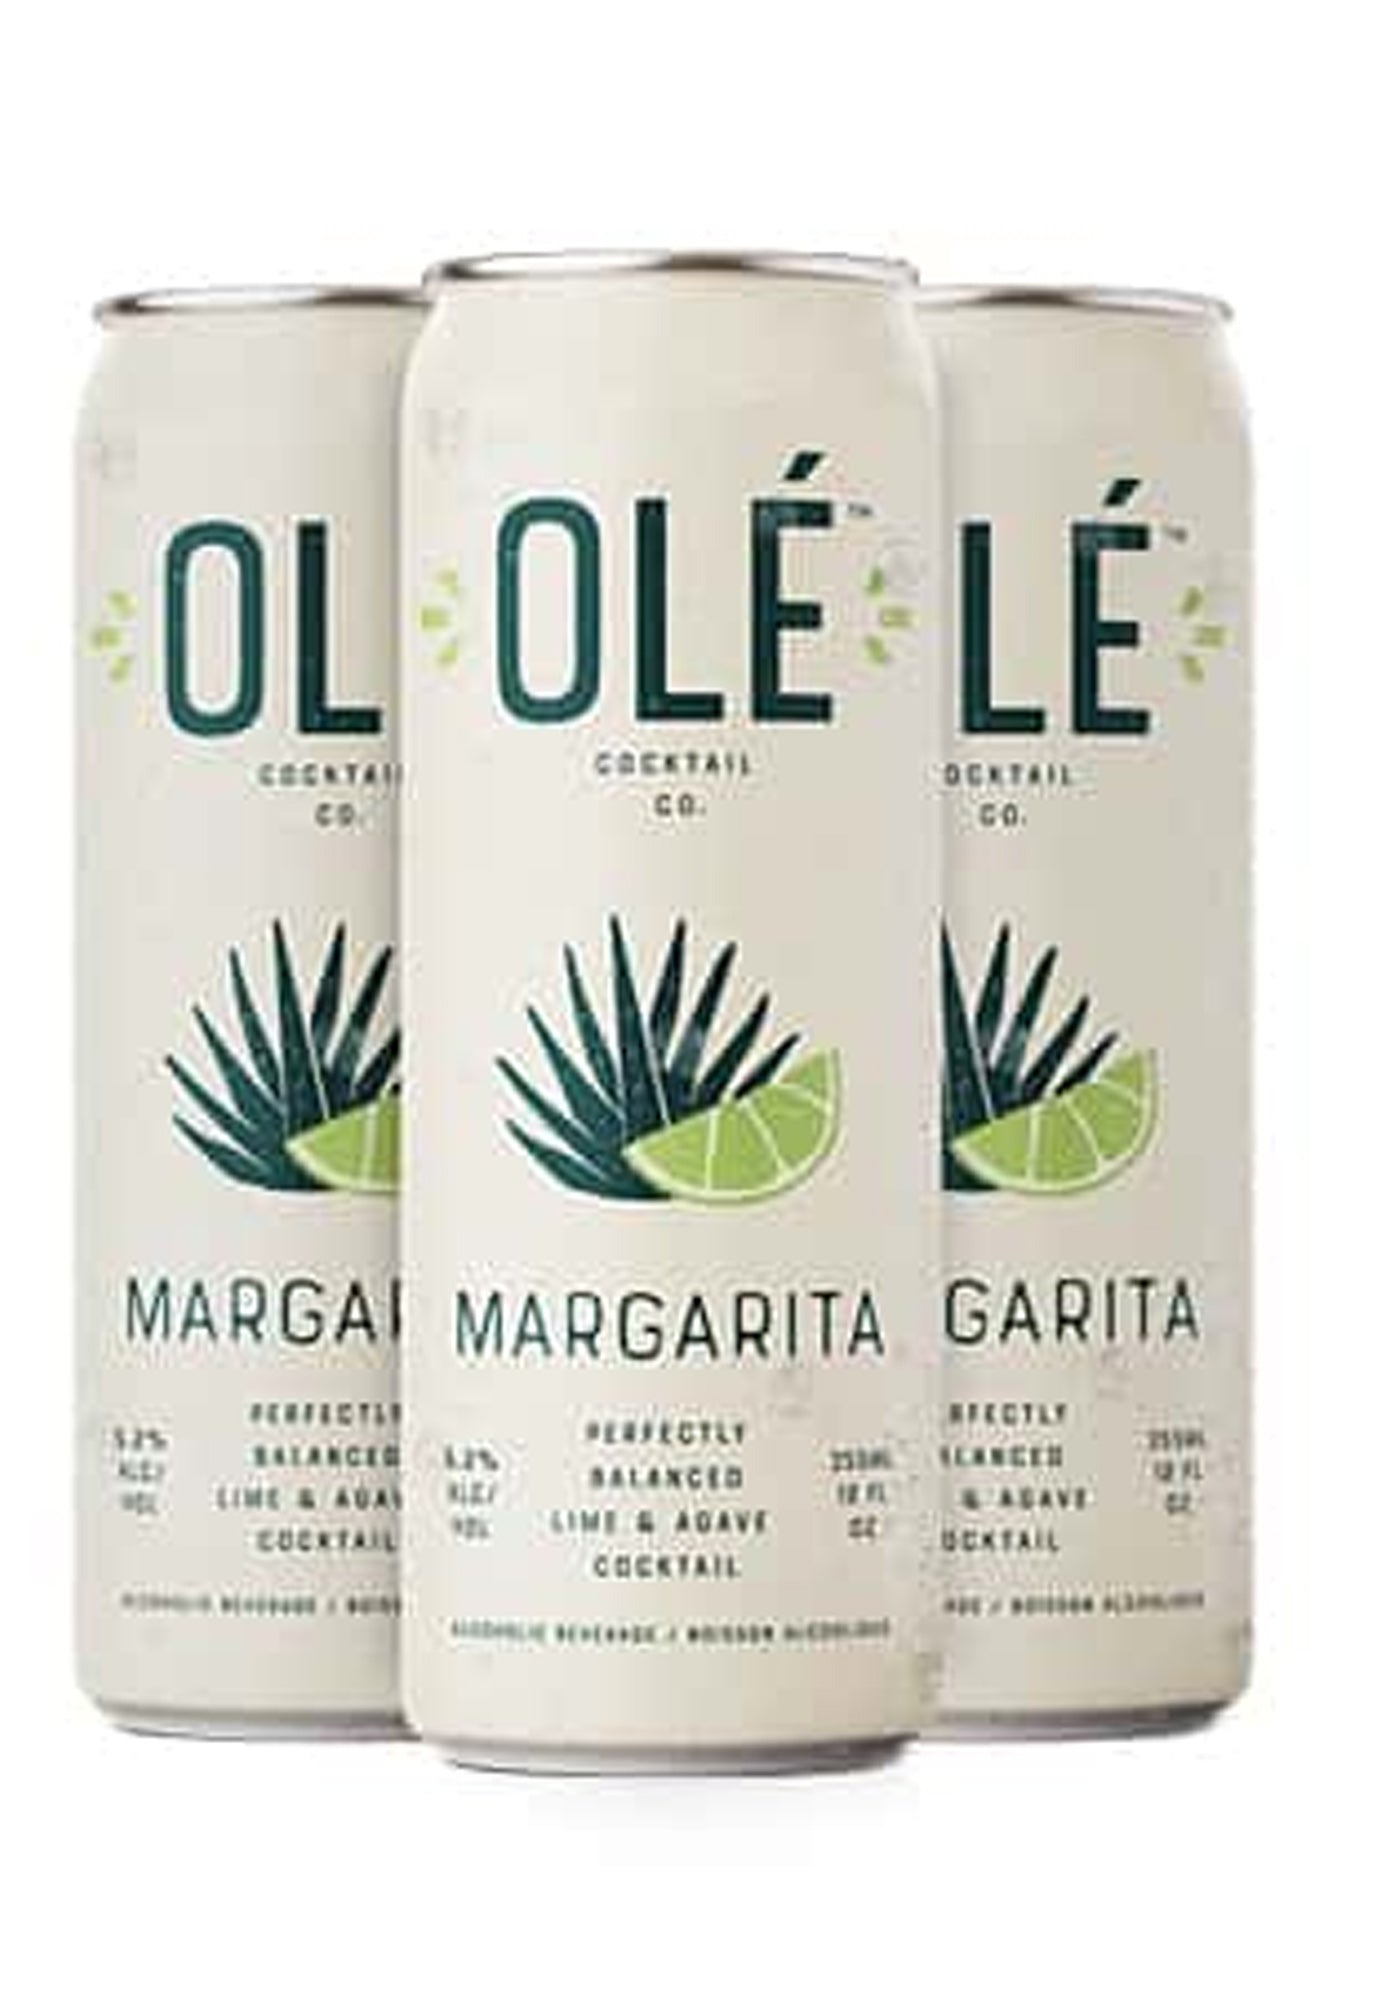 Ole Margarita Cooler 355 ml - 4 Cans